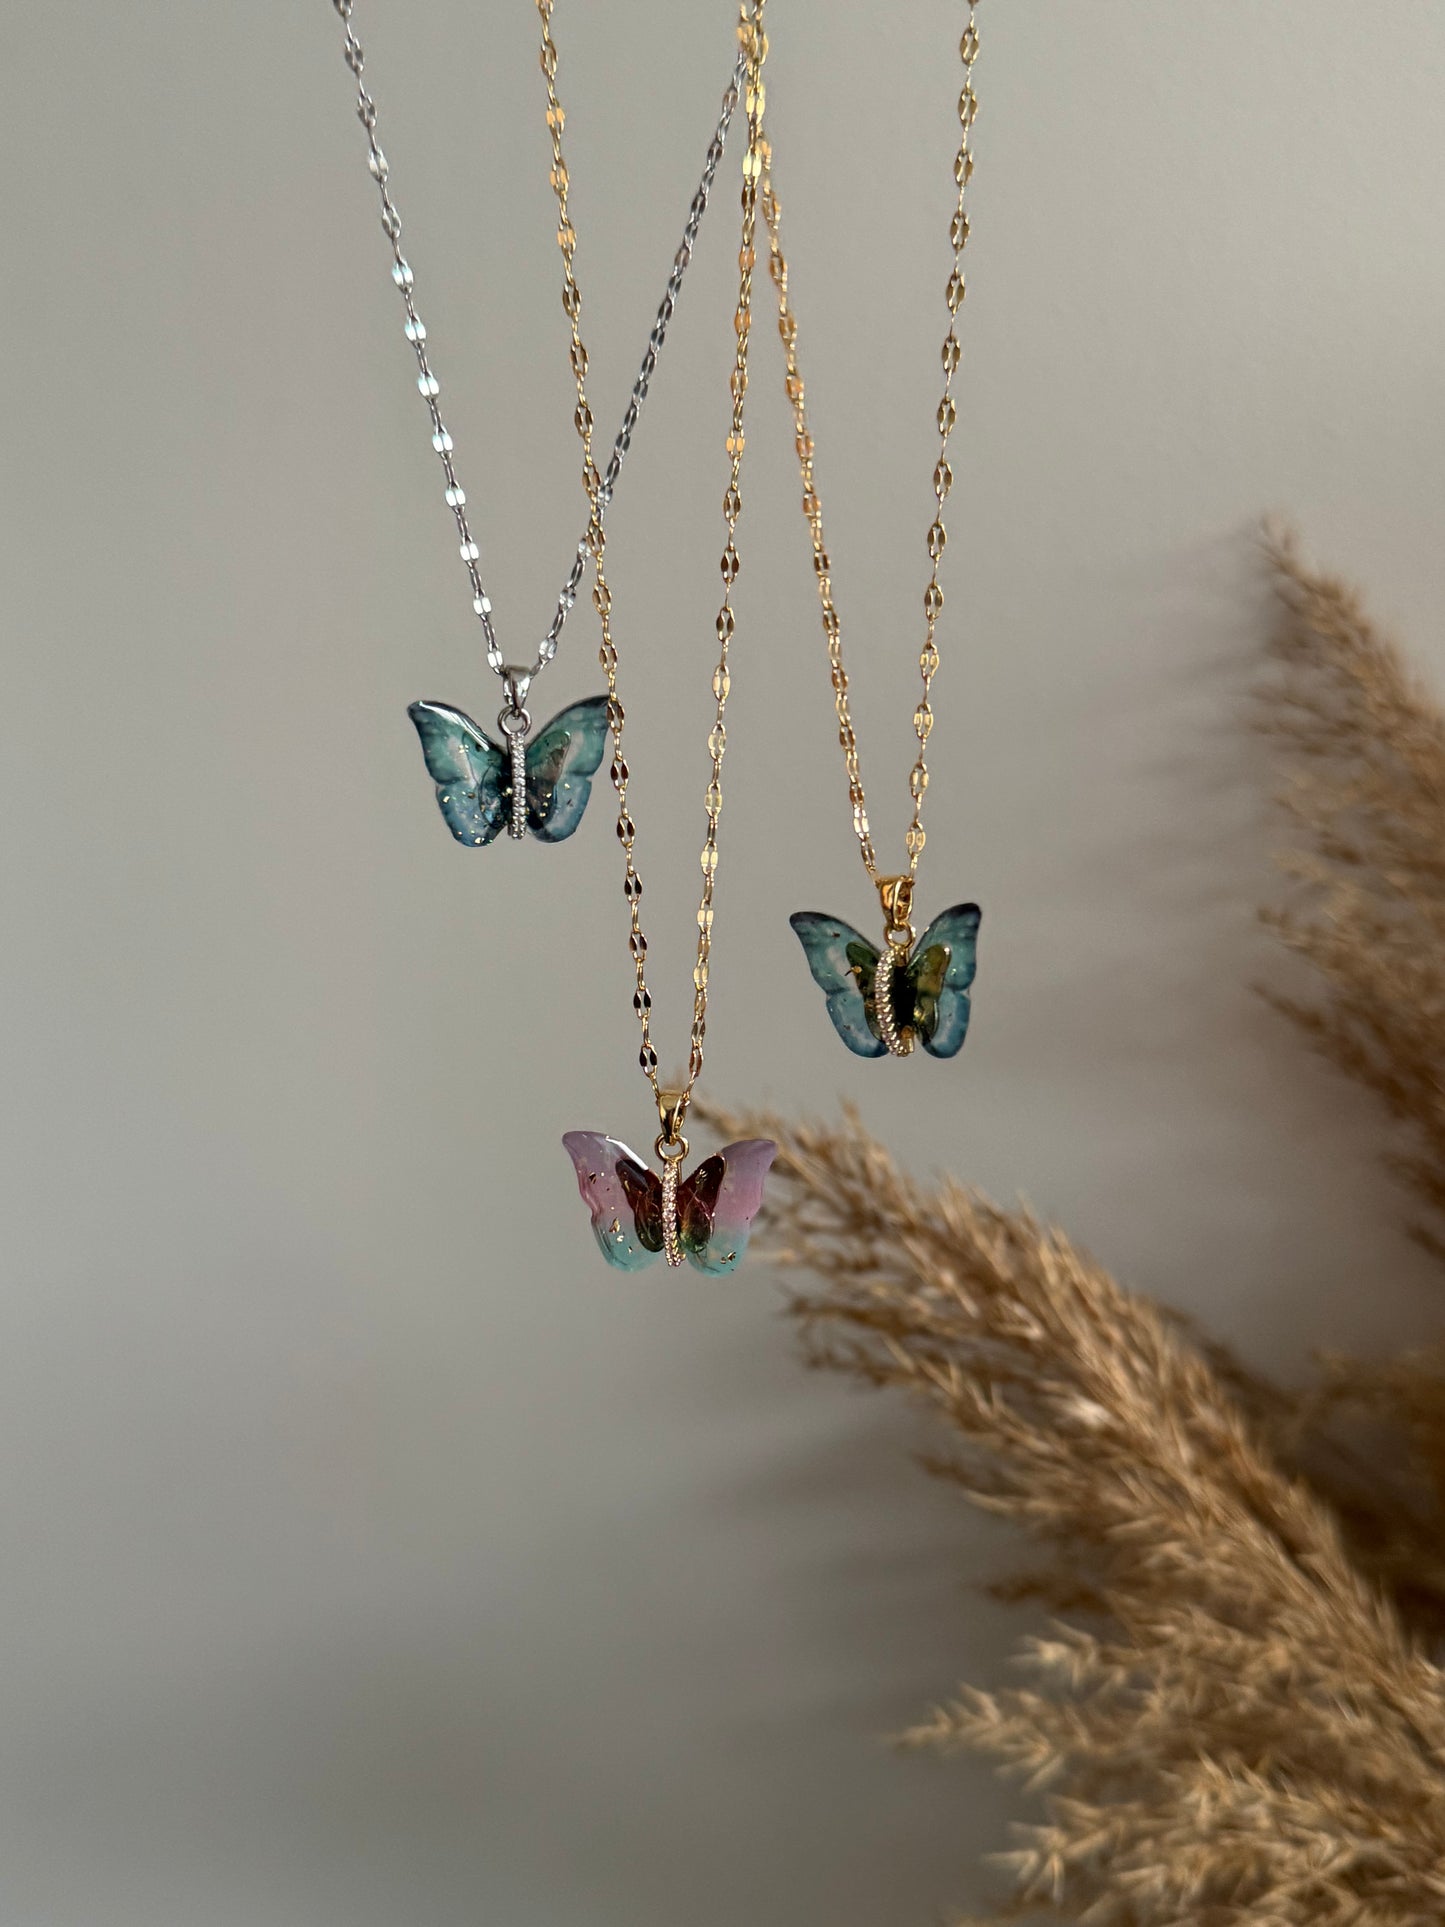 Mariposa butterfly necklaces